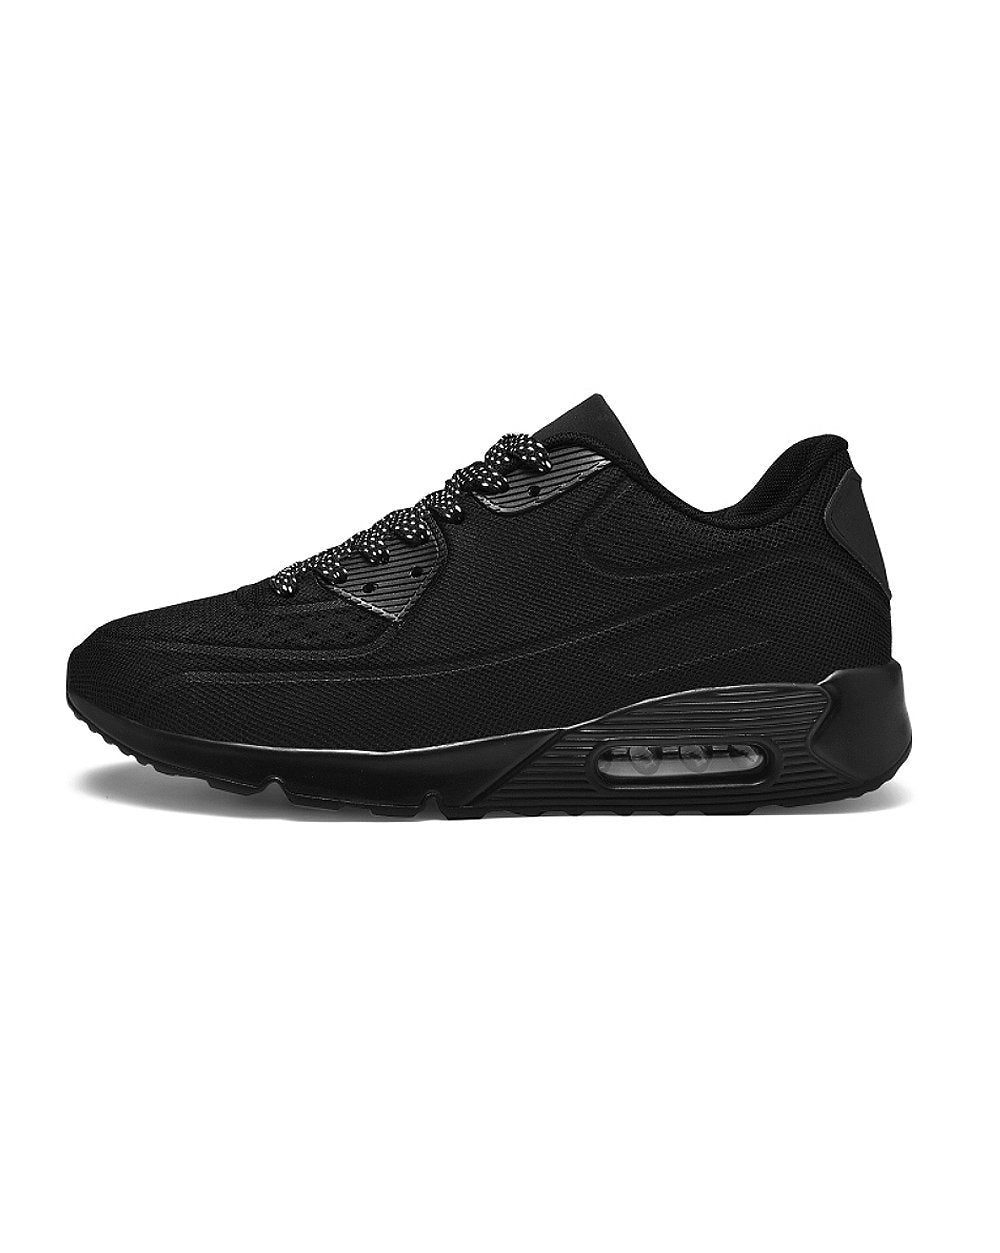 Men's black lace-up Air sneakers with shaped sole